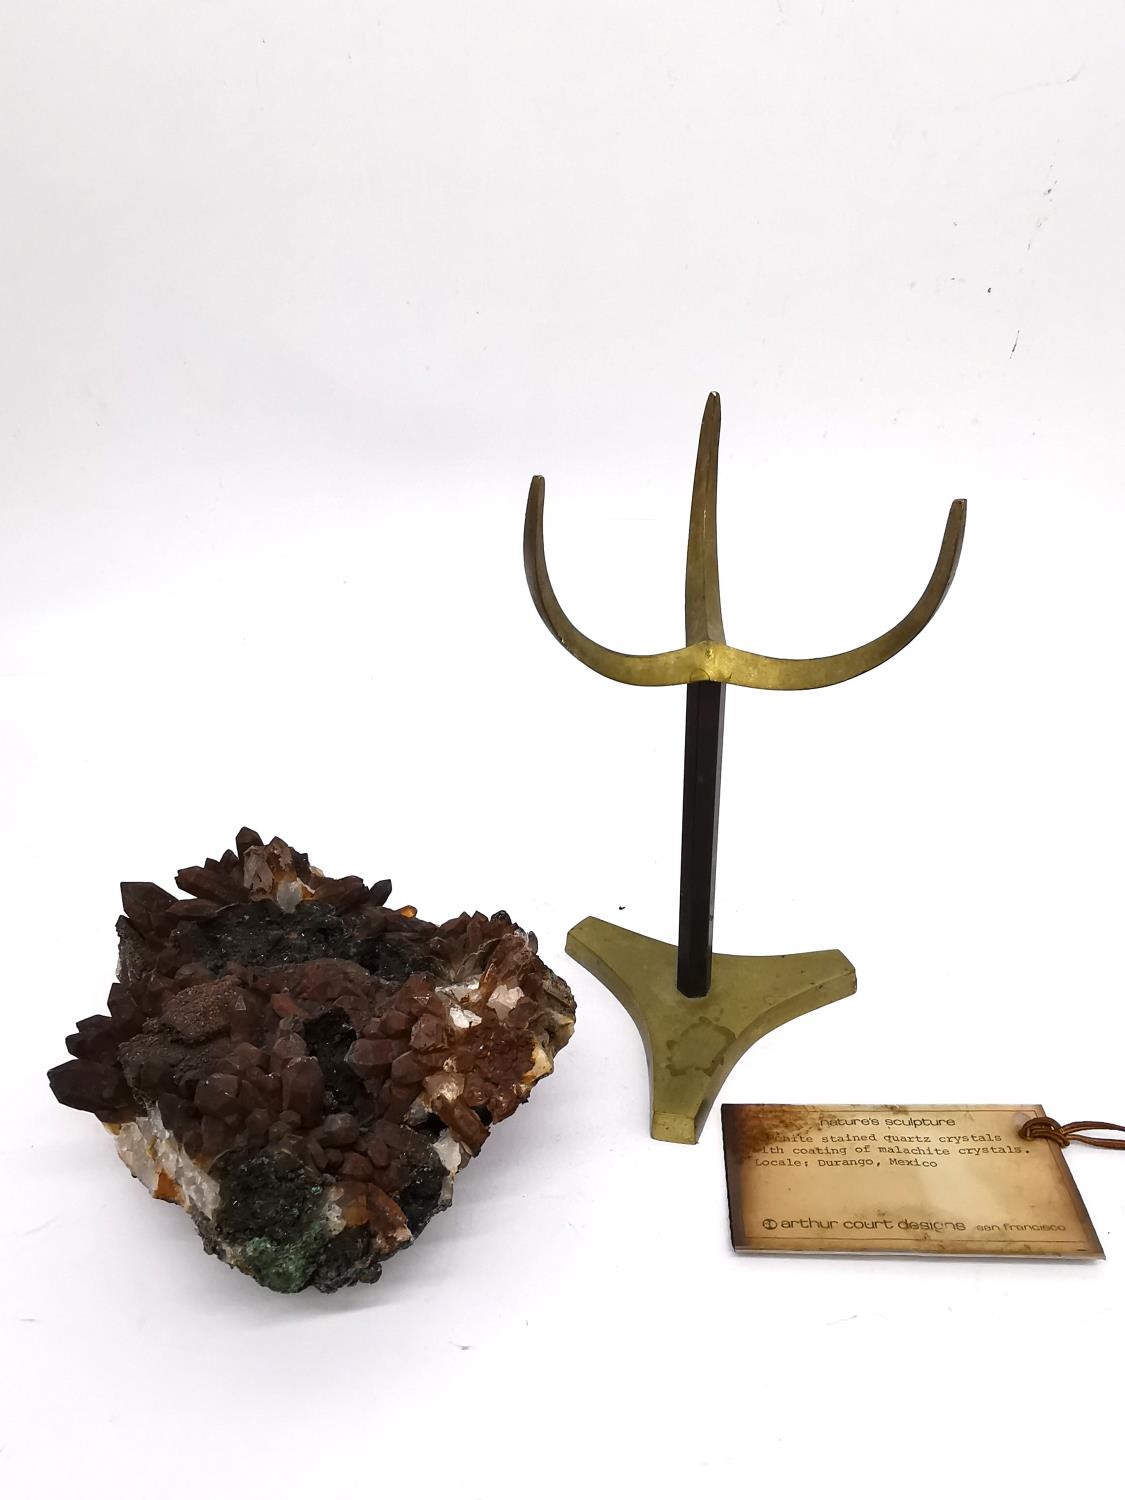 A Limonite stained quartz and malachite crystal specimen from Durango, Mexico. Mounted on brass - Image 8 of 8